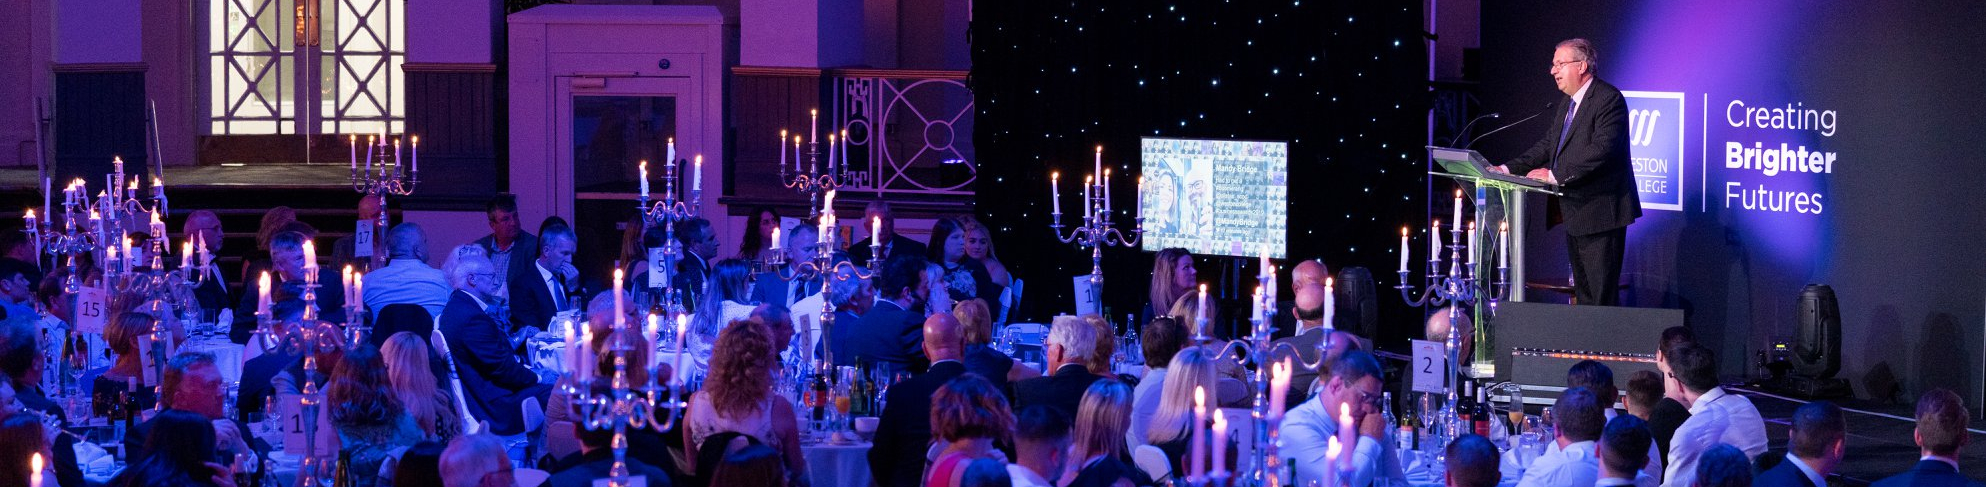 Business awards 2019 guests sat at tables